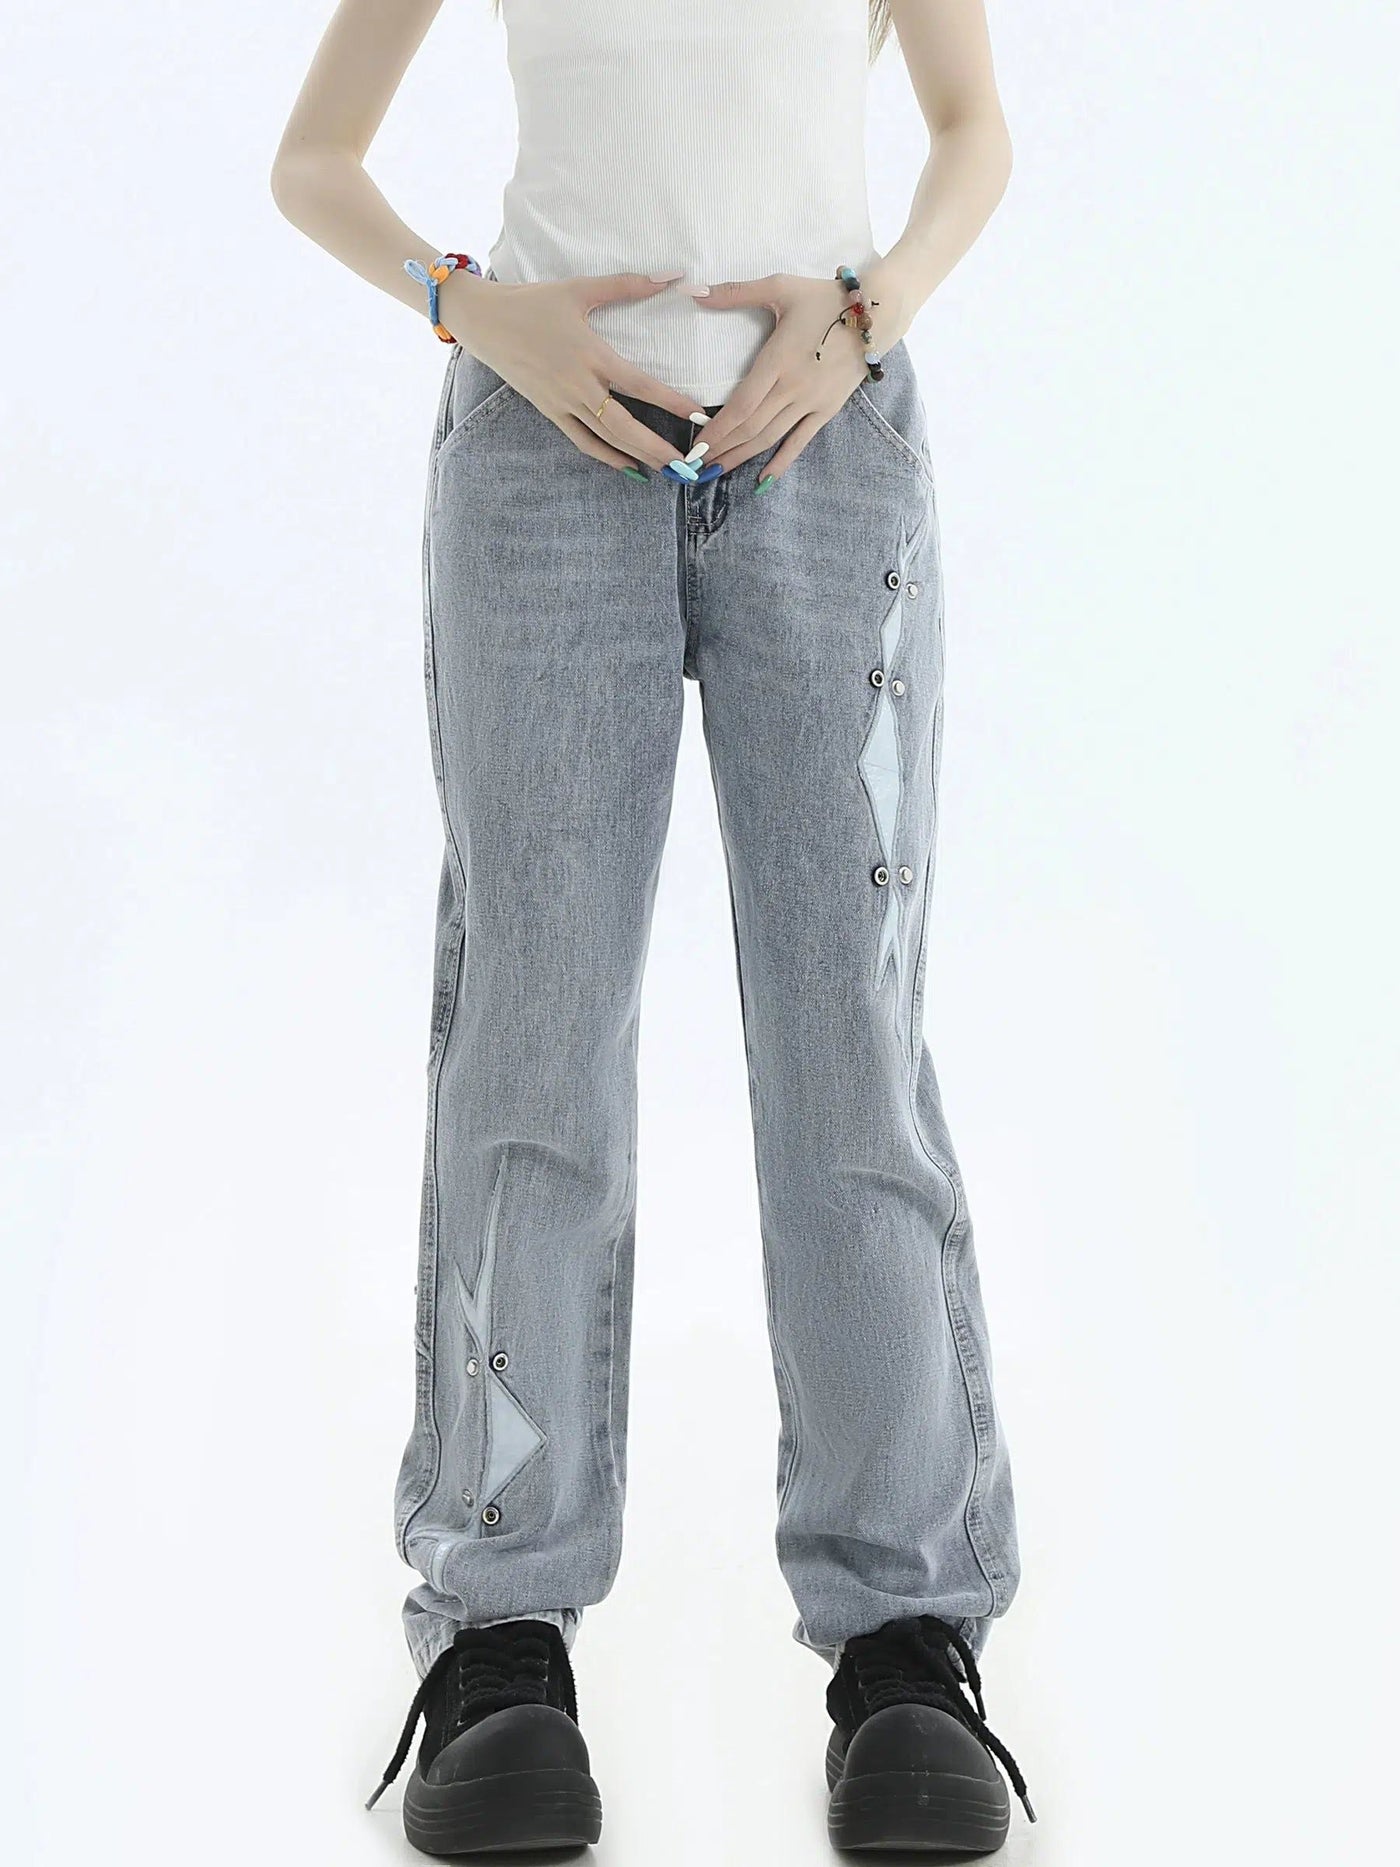 Blade and Buttons Jeans Korean Street Fashion Jeans By INS Korea Shop Online at OH Vault